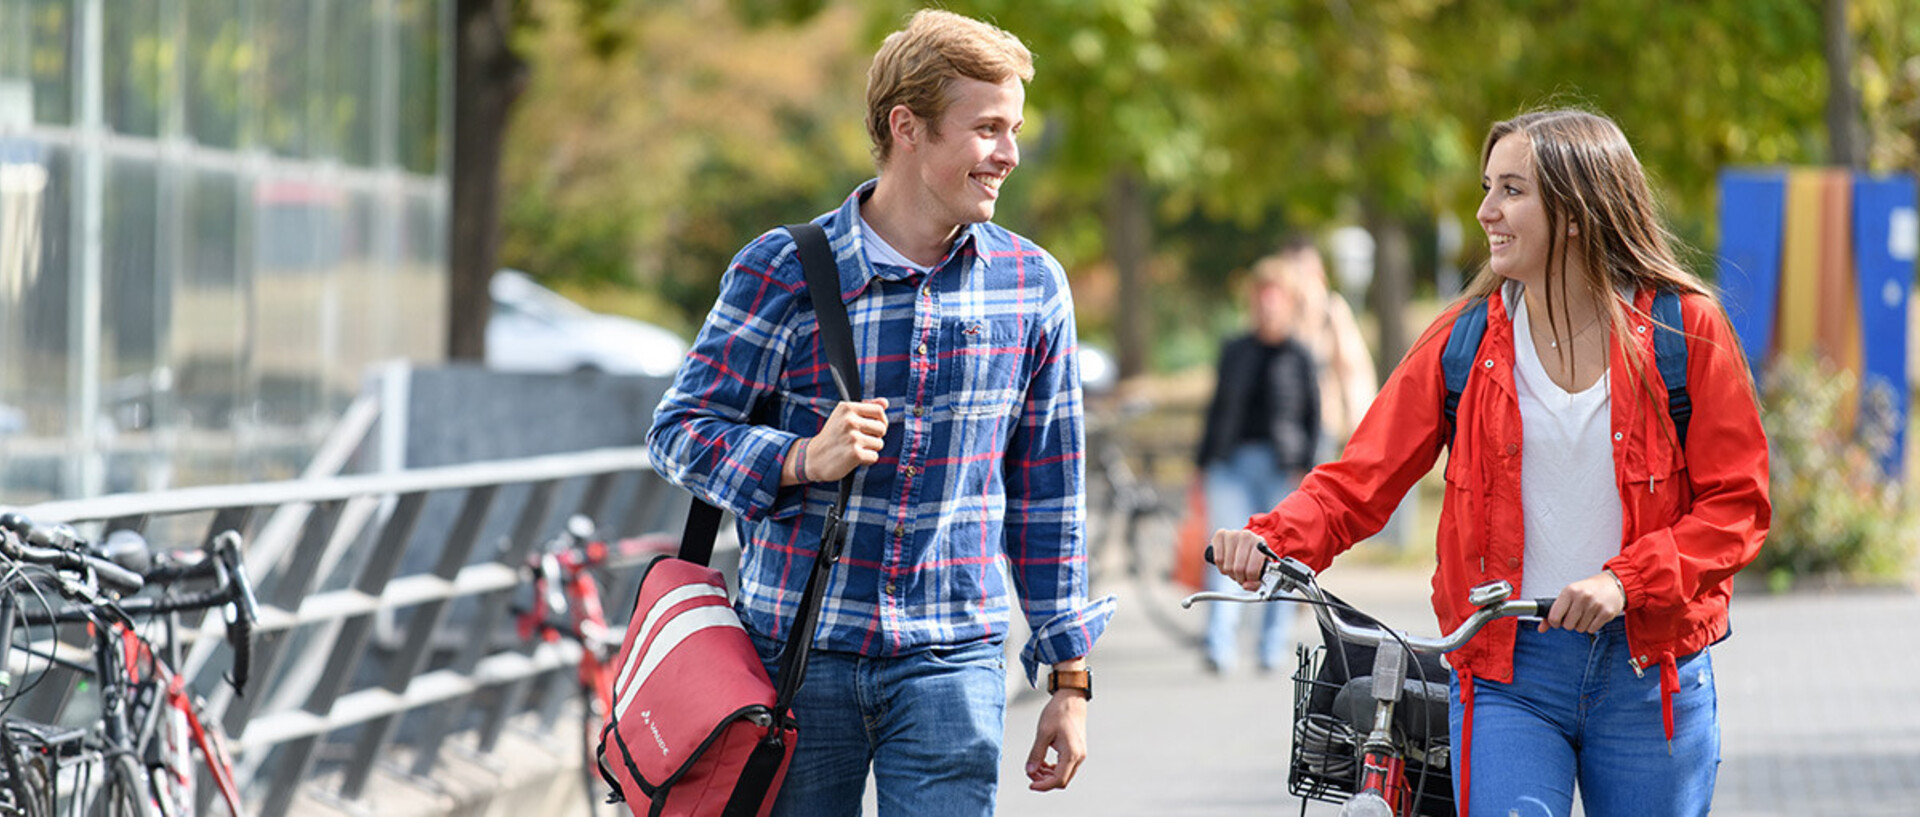 A female student and a male student laugh while walking side by side on a paved path. The female student is pushing her bike.